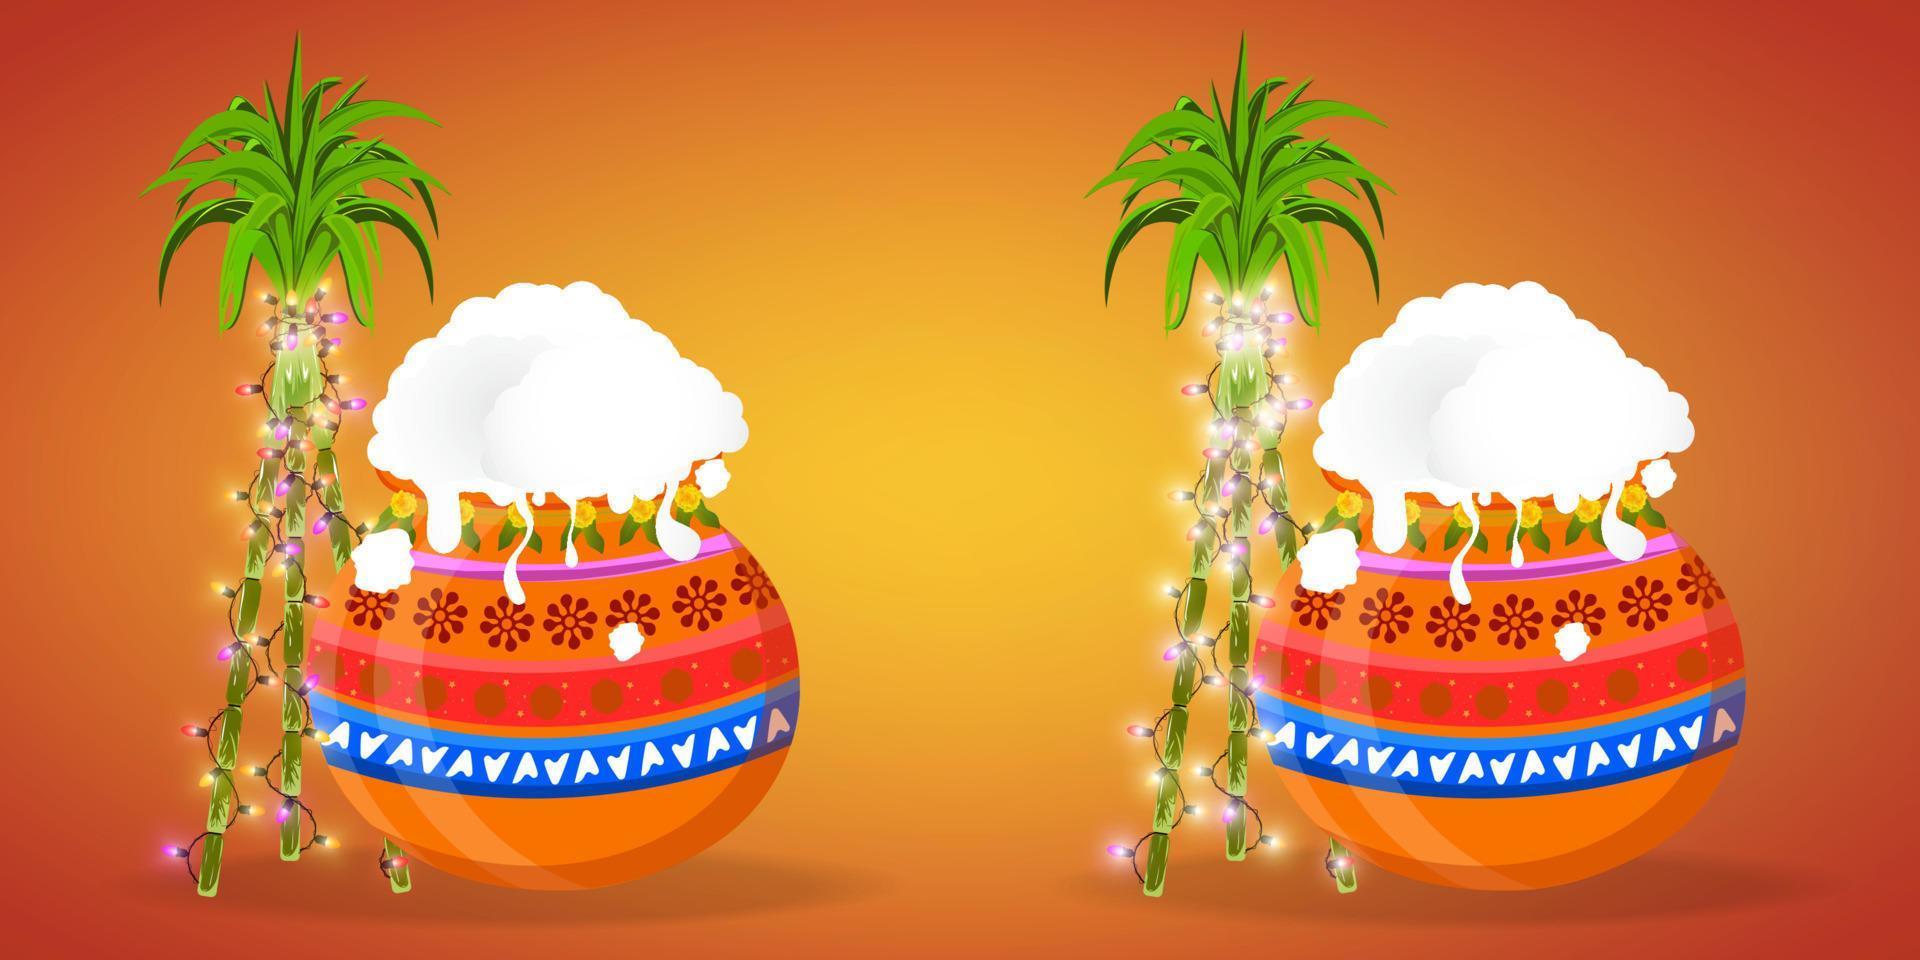 Happy Pongal Holiday Harvest Festival of Tamil Nadu South India. Canes decorated with flashing lights and a Pongal pot nearby. vector illustration